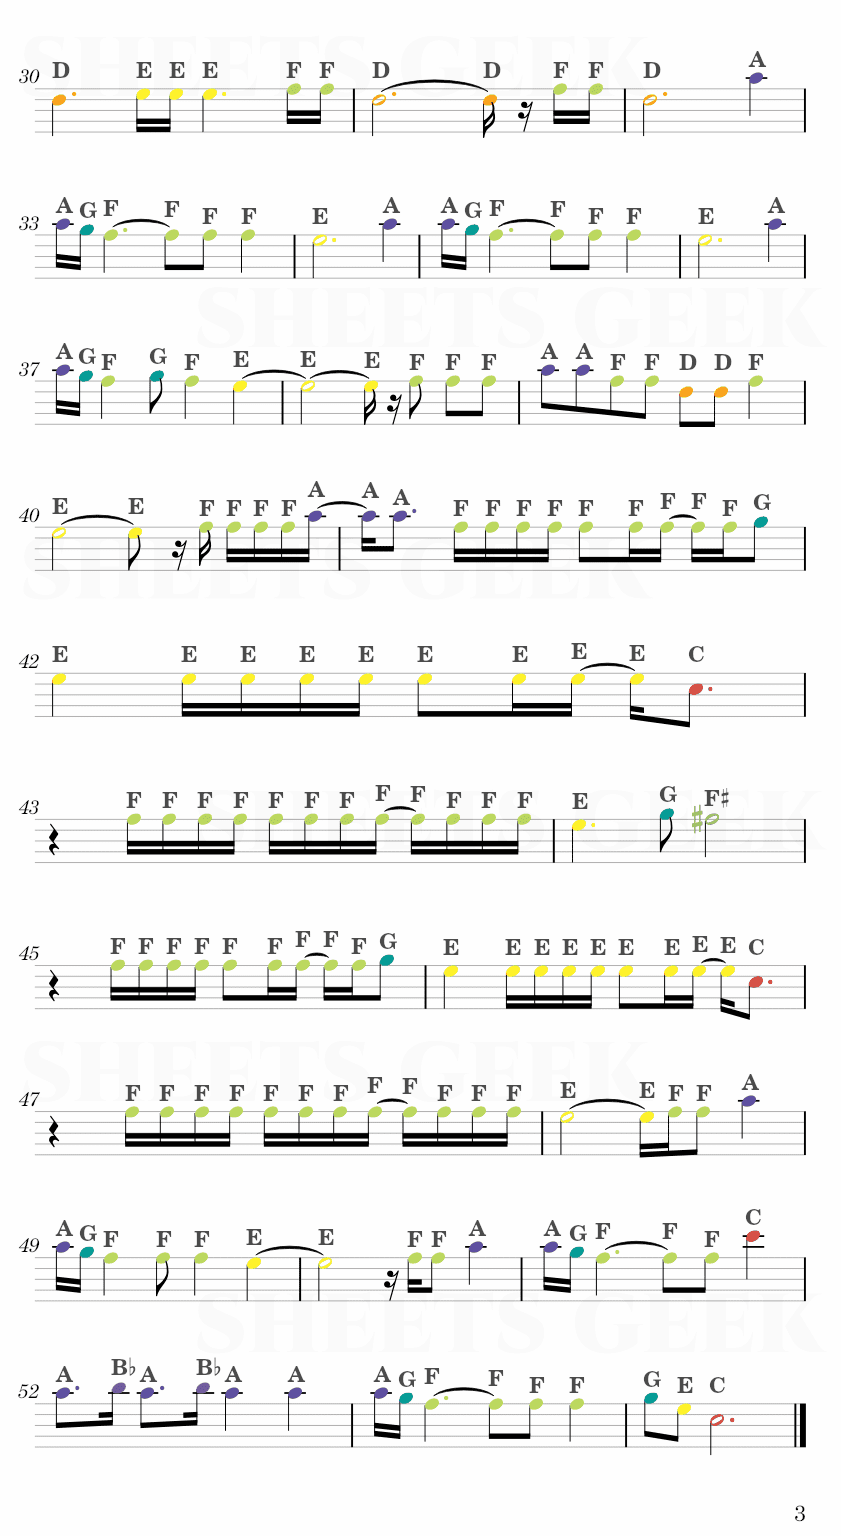 Earfquake - Tyler, The Creator Easy Sheet Music Free for piano, keyboard, flute, violin, sax, cello page 3